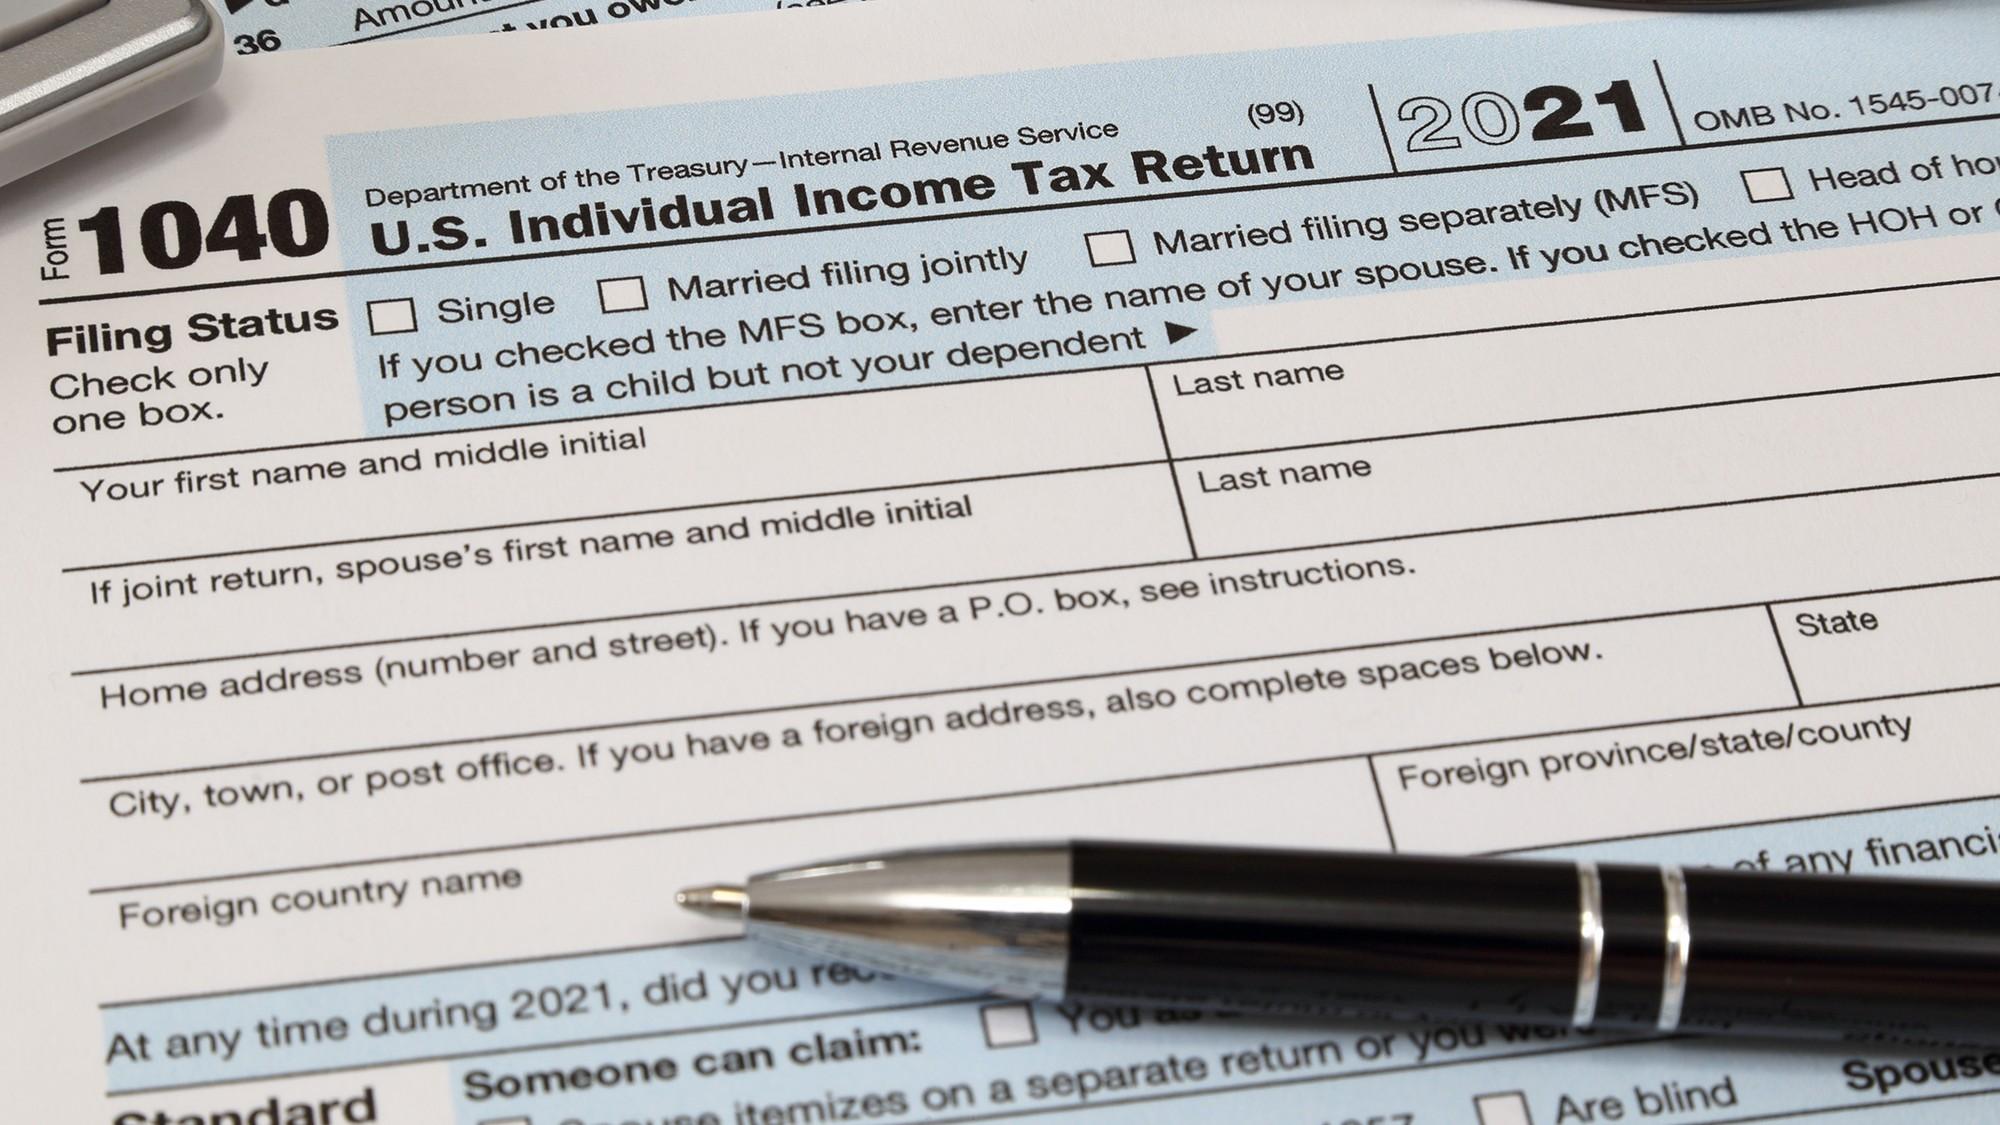 The Internal Revenue Service tax filing deadline in 2022 is scheduled for April 18. Here’s what you need to know about filing your 2021 taxes. (Adobe Stock)